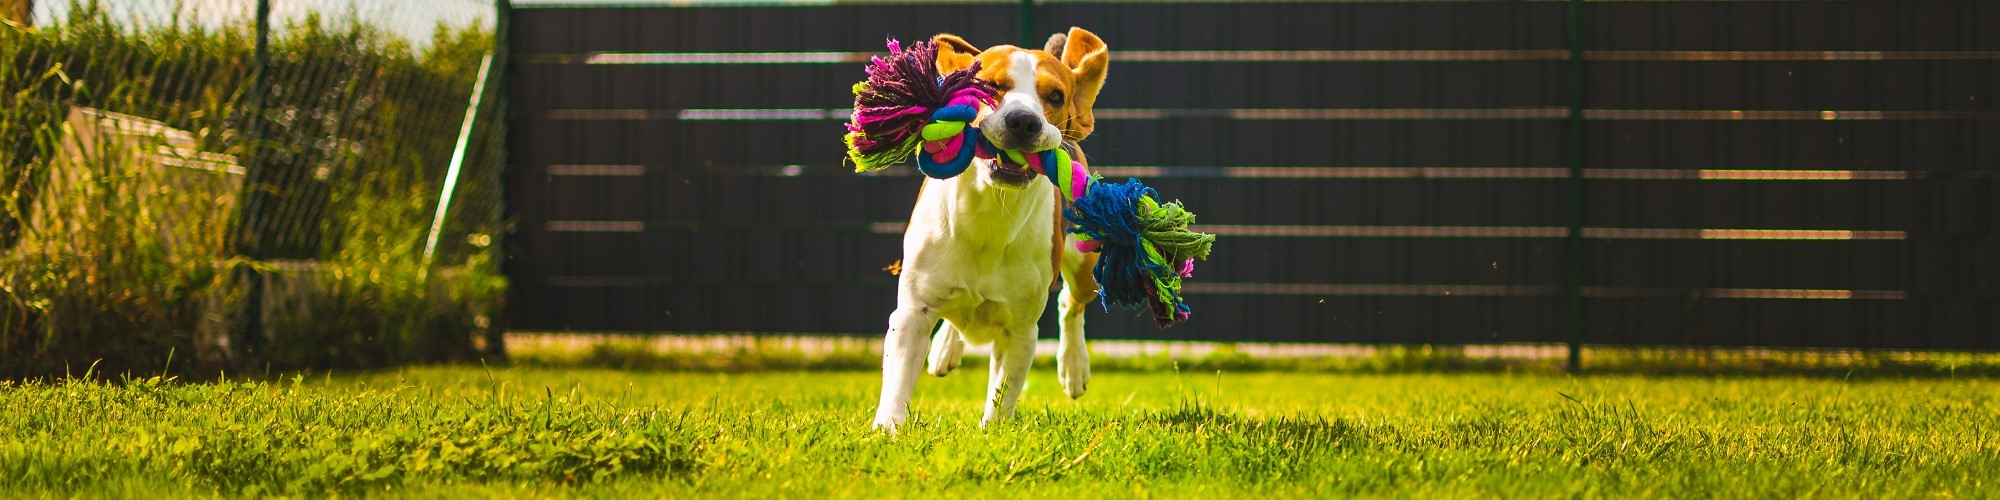 8 Fun Summer Activities to Enjoy with Your Furry Friends